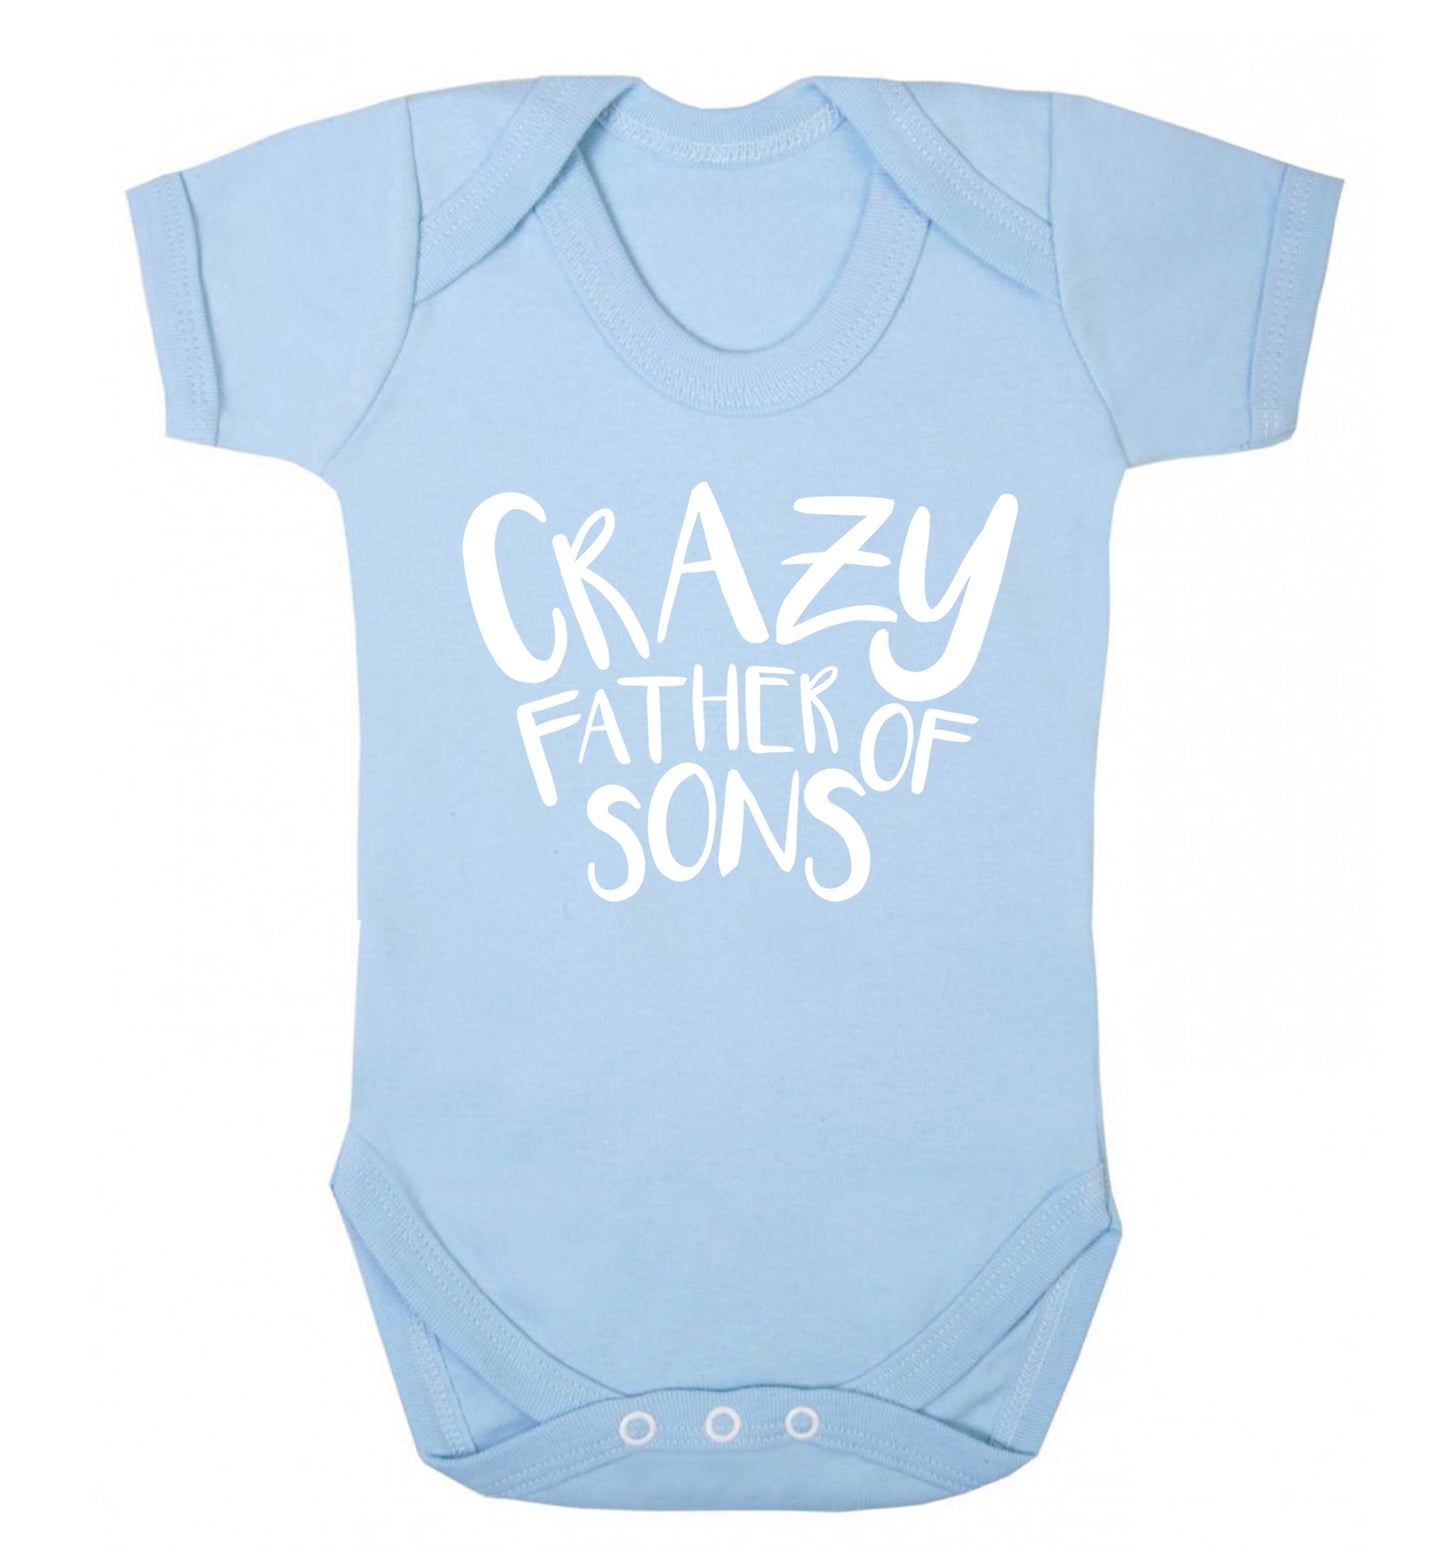 Crazy father of sons Baby Vest pale blue 18-24 months